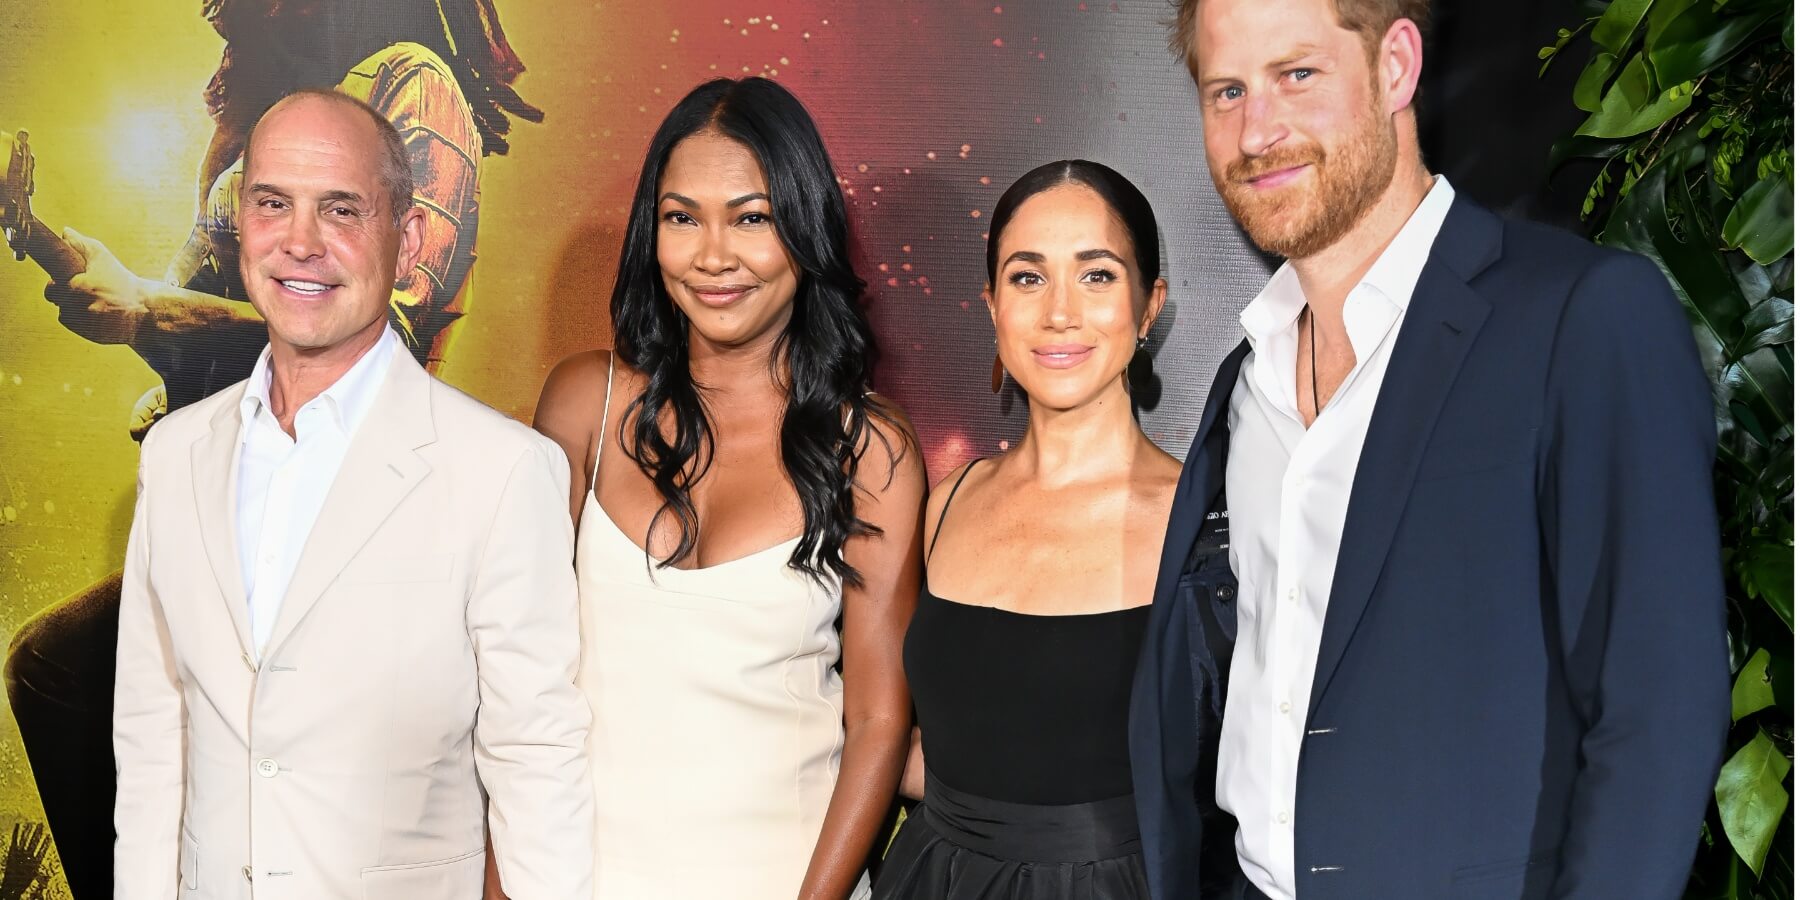 Brian Robbins, Tracy James, Meghan Markle and Prince Harry on the red carpet premiere of the Bob Marley film 'One Love.'